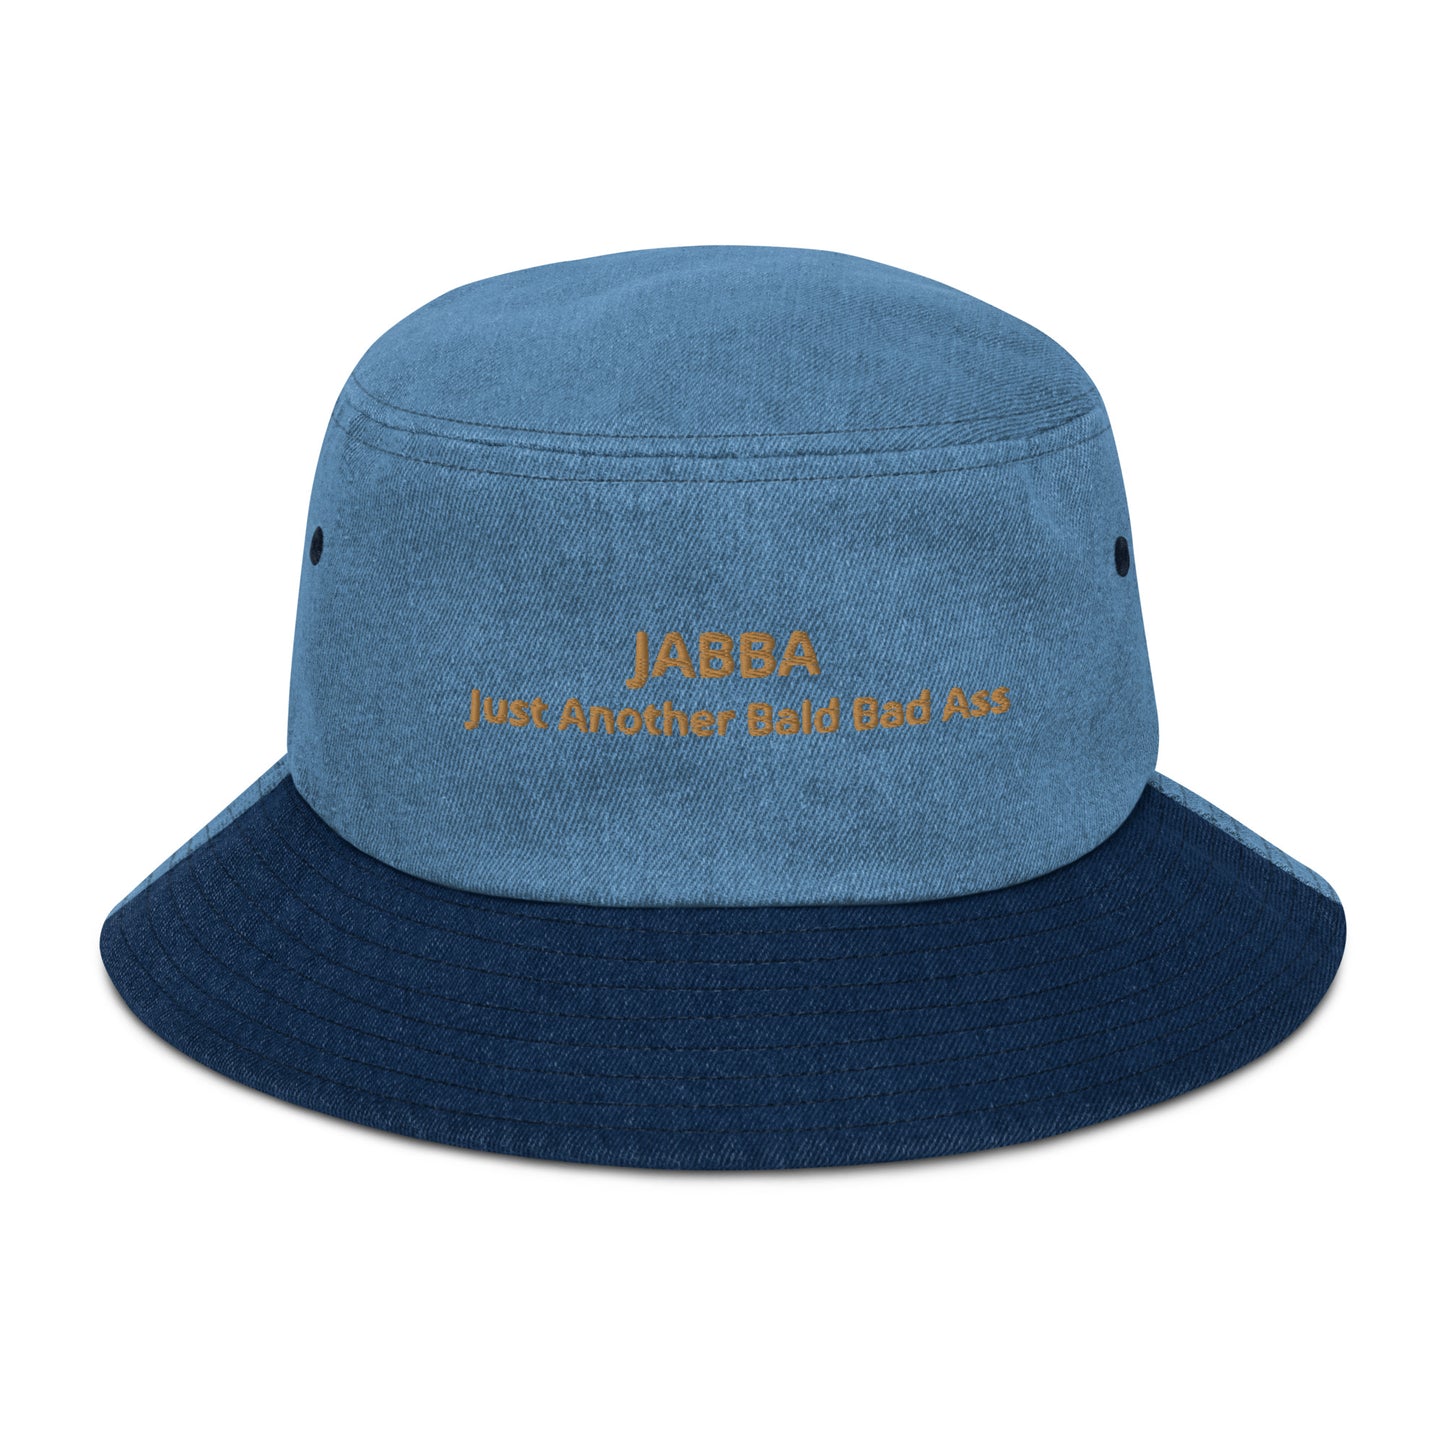 Stay stylish and comfortable on the go with the JABBA sporty denim bucket hat.